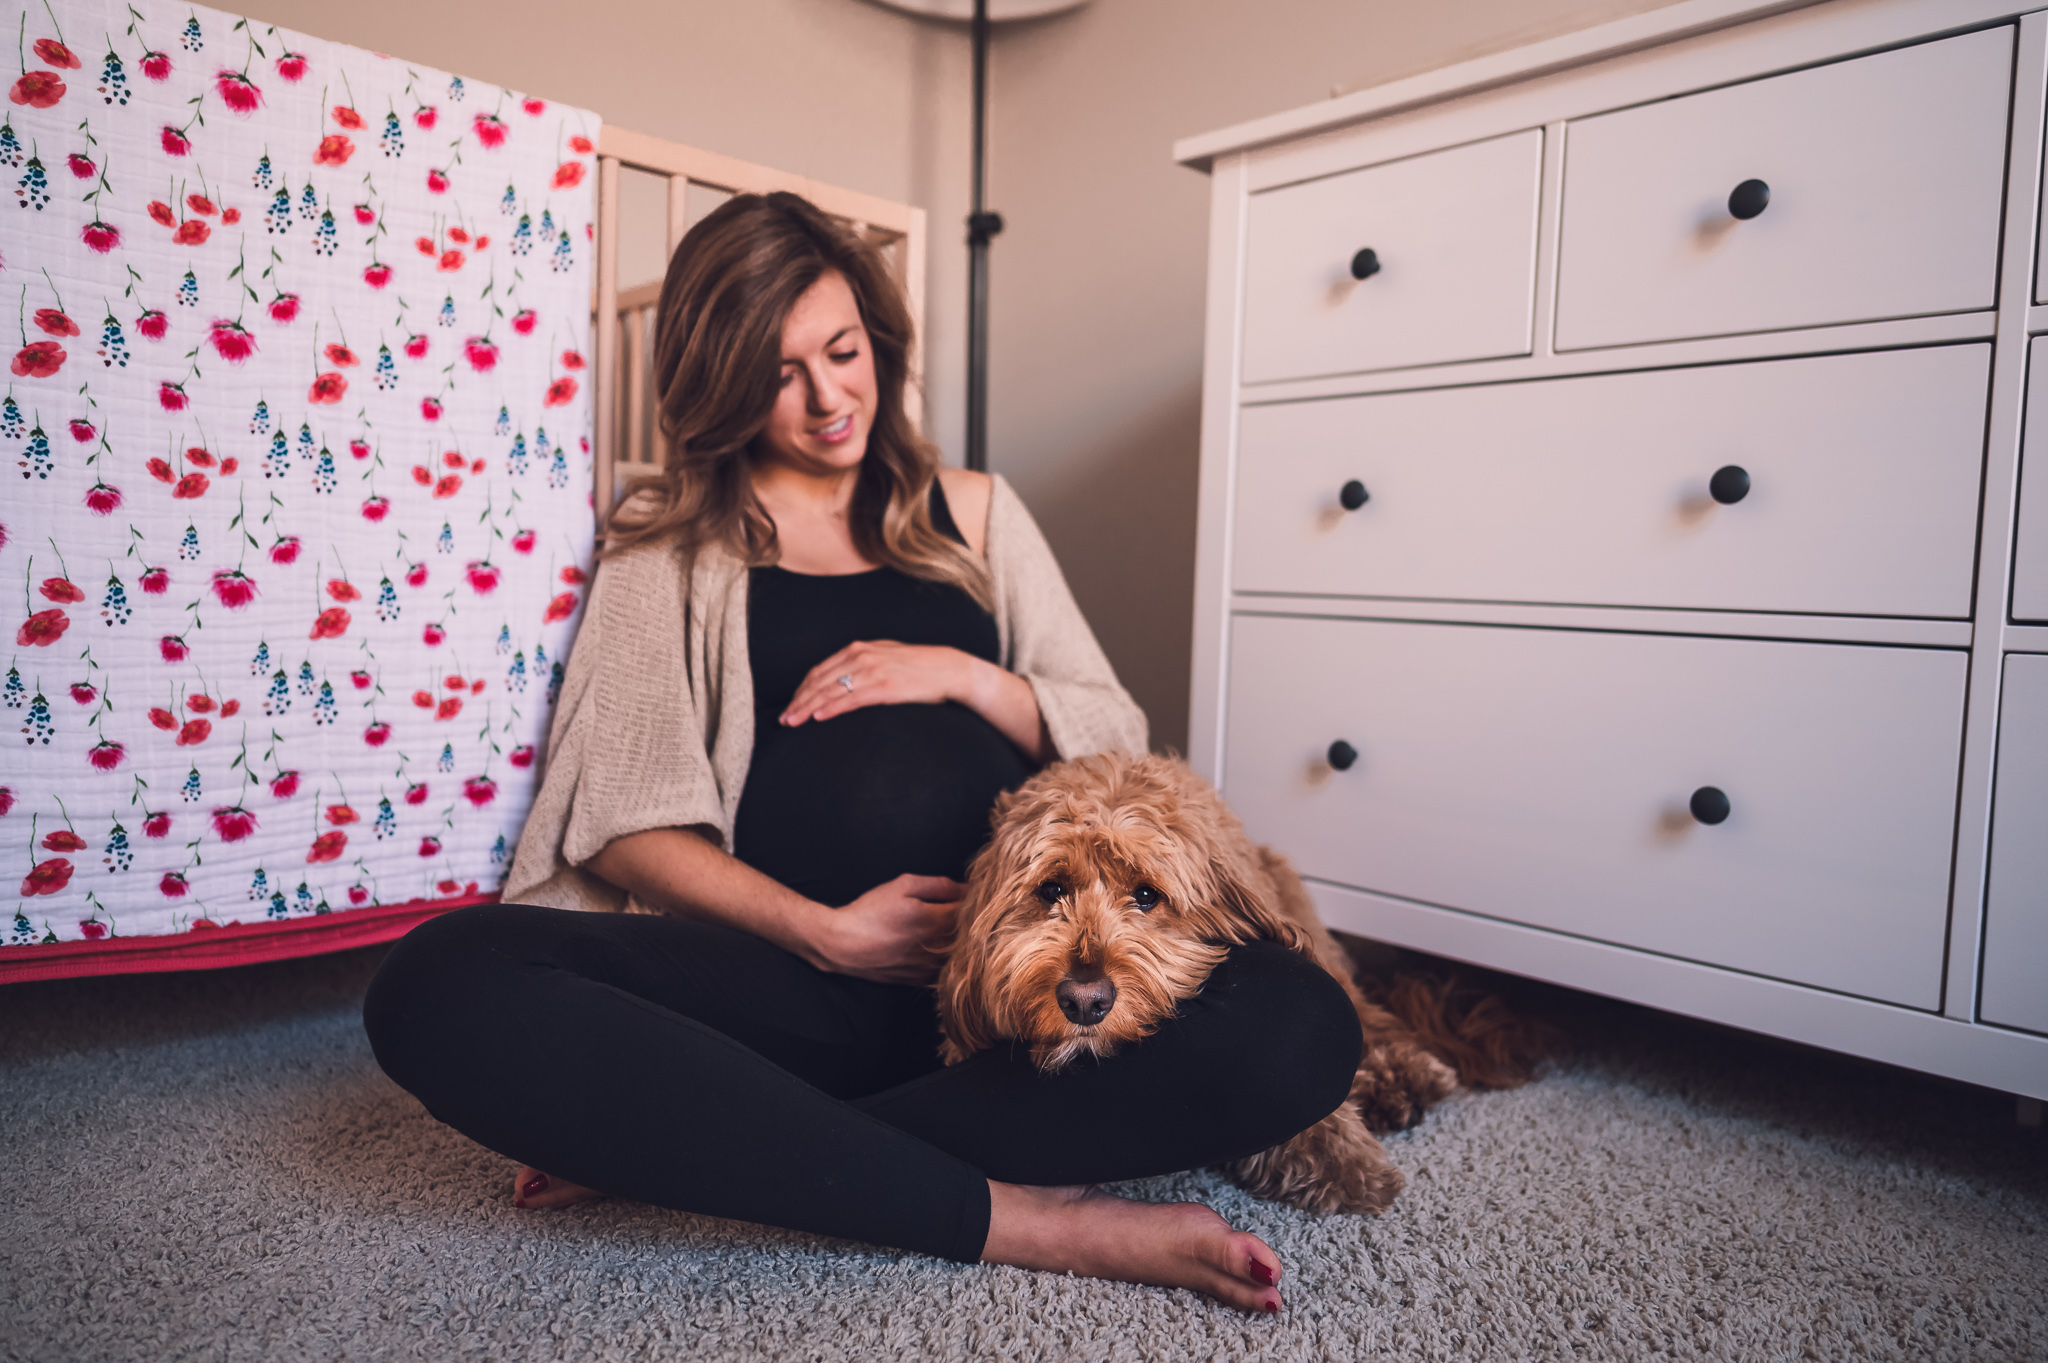 In-home maternity photography session with dog